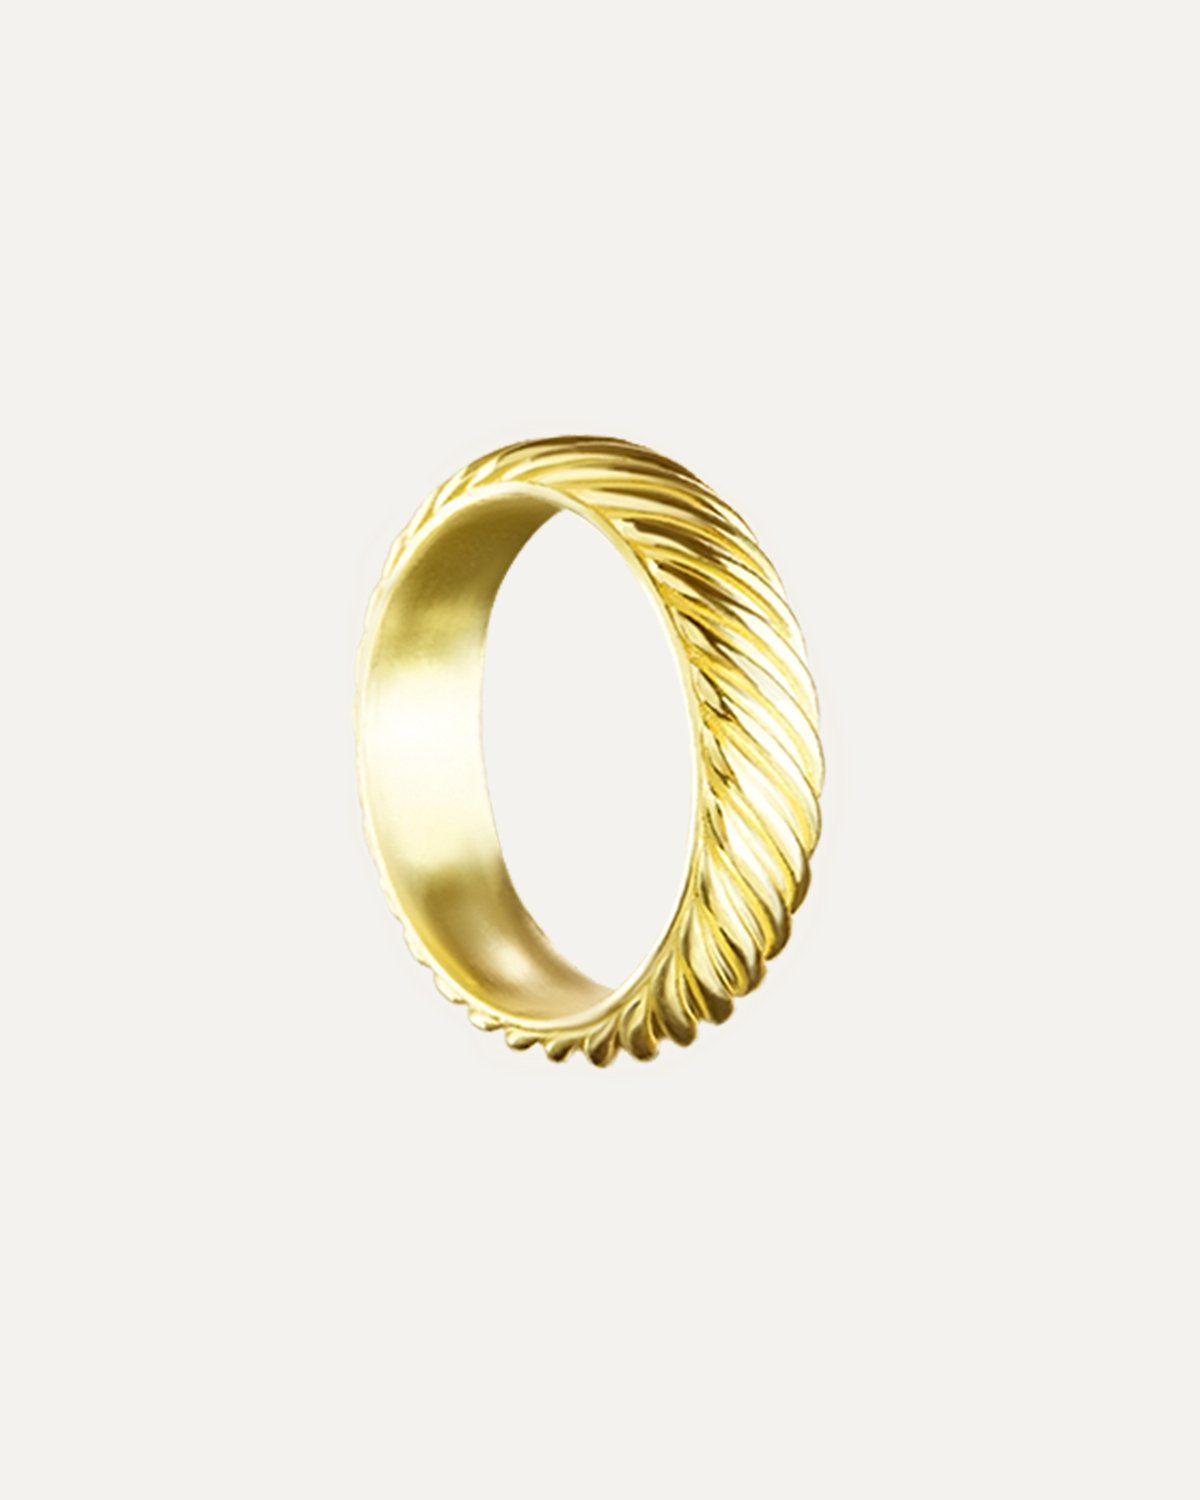 Entwine Ring theaceline.com